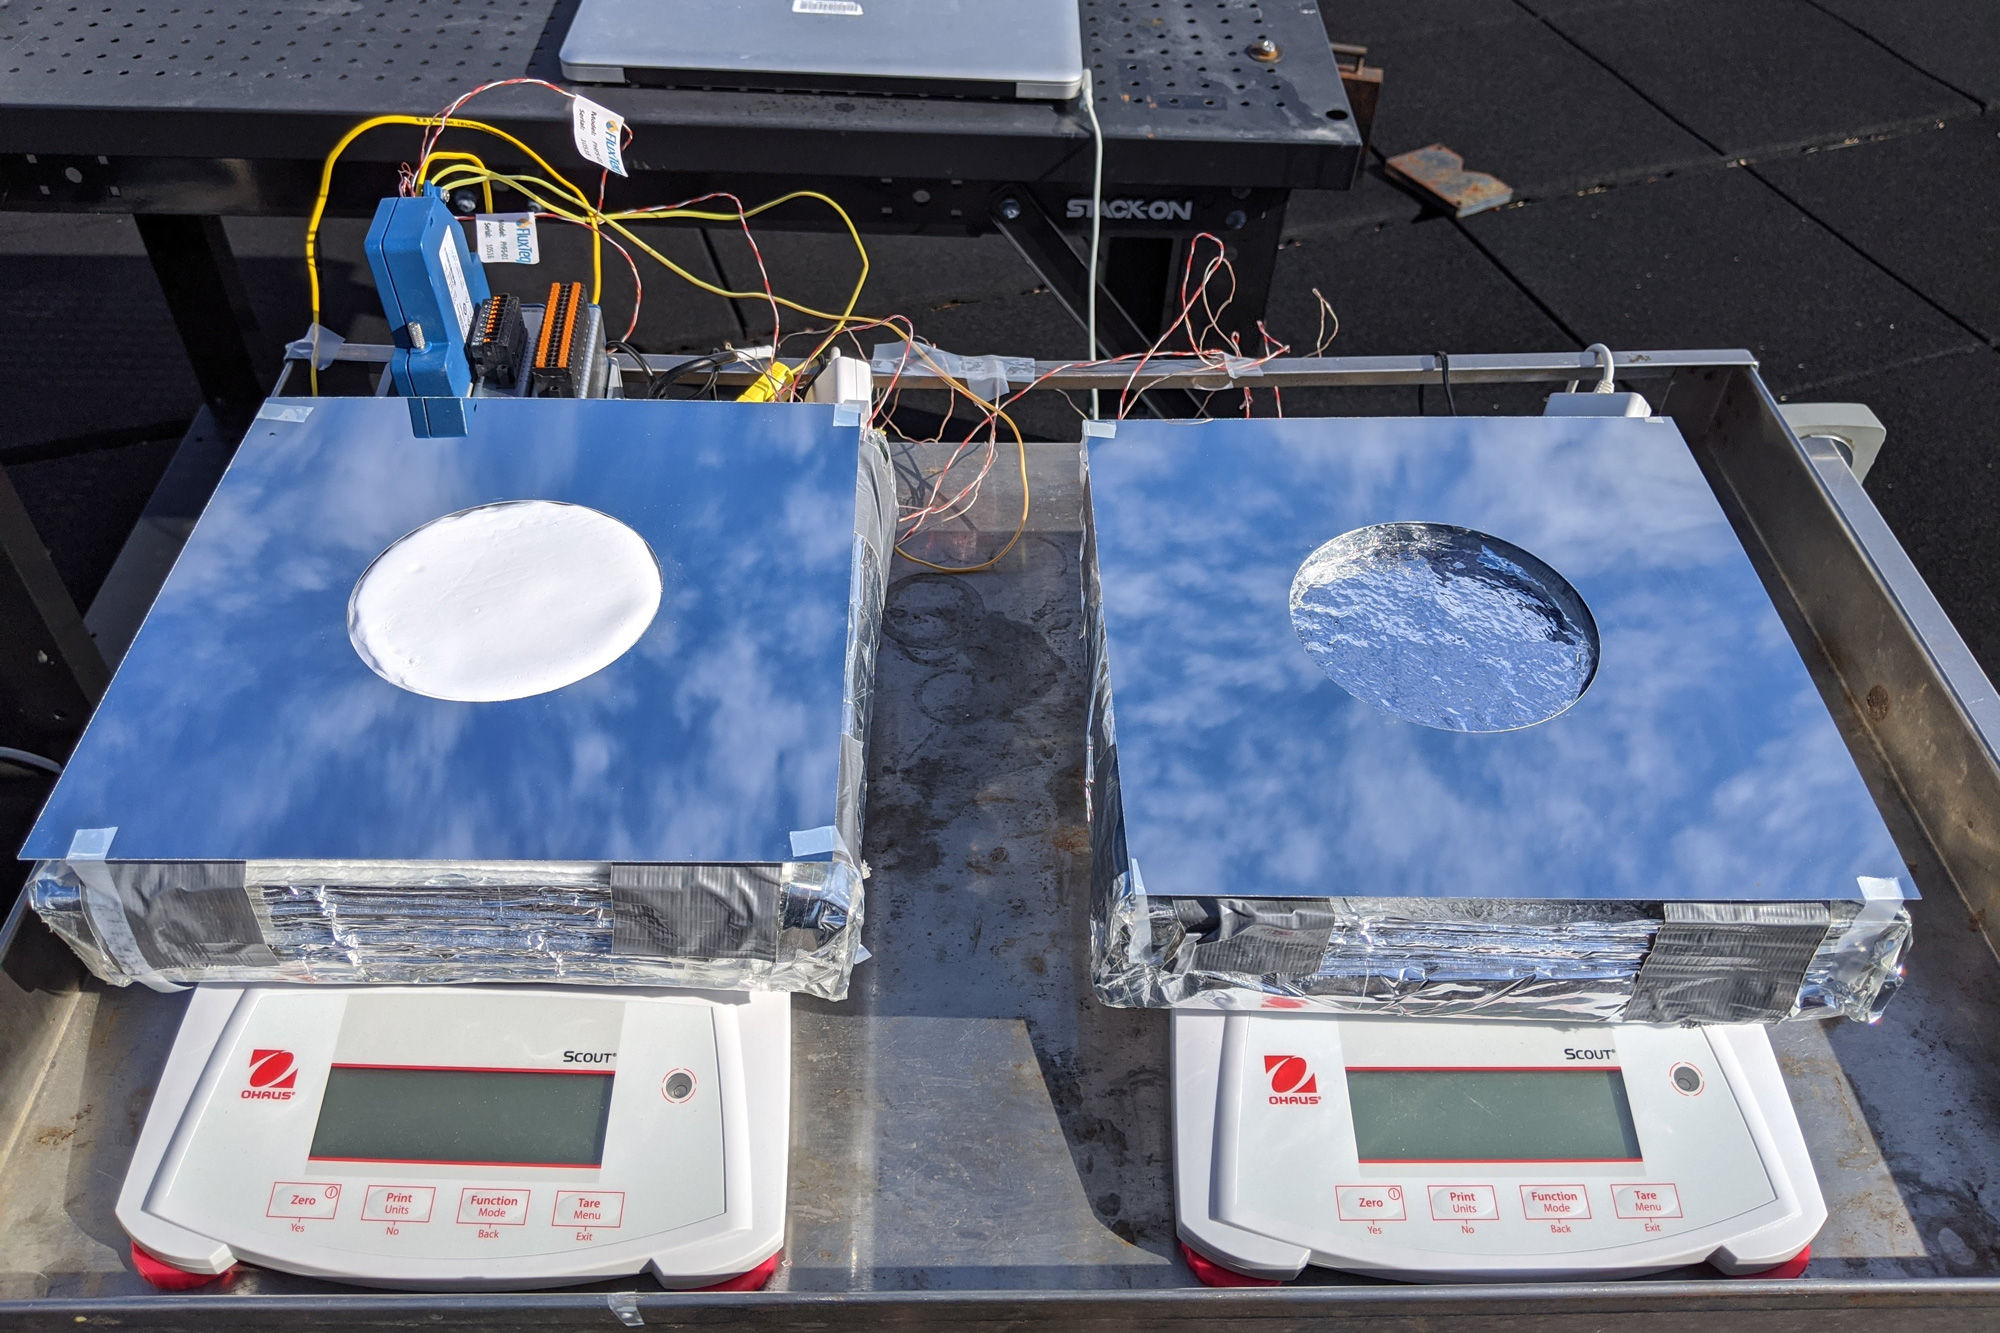 Passive cooling system could benefit off-grid locations - MIT News